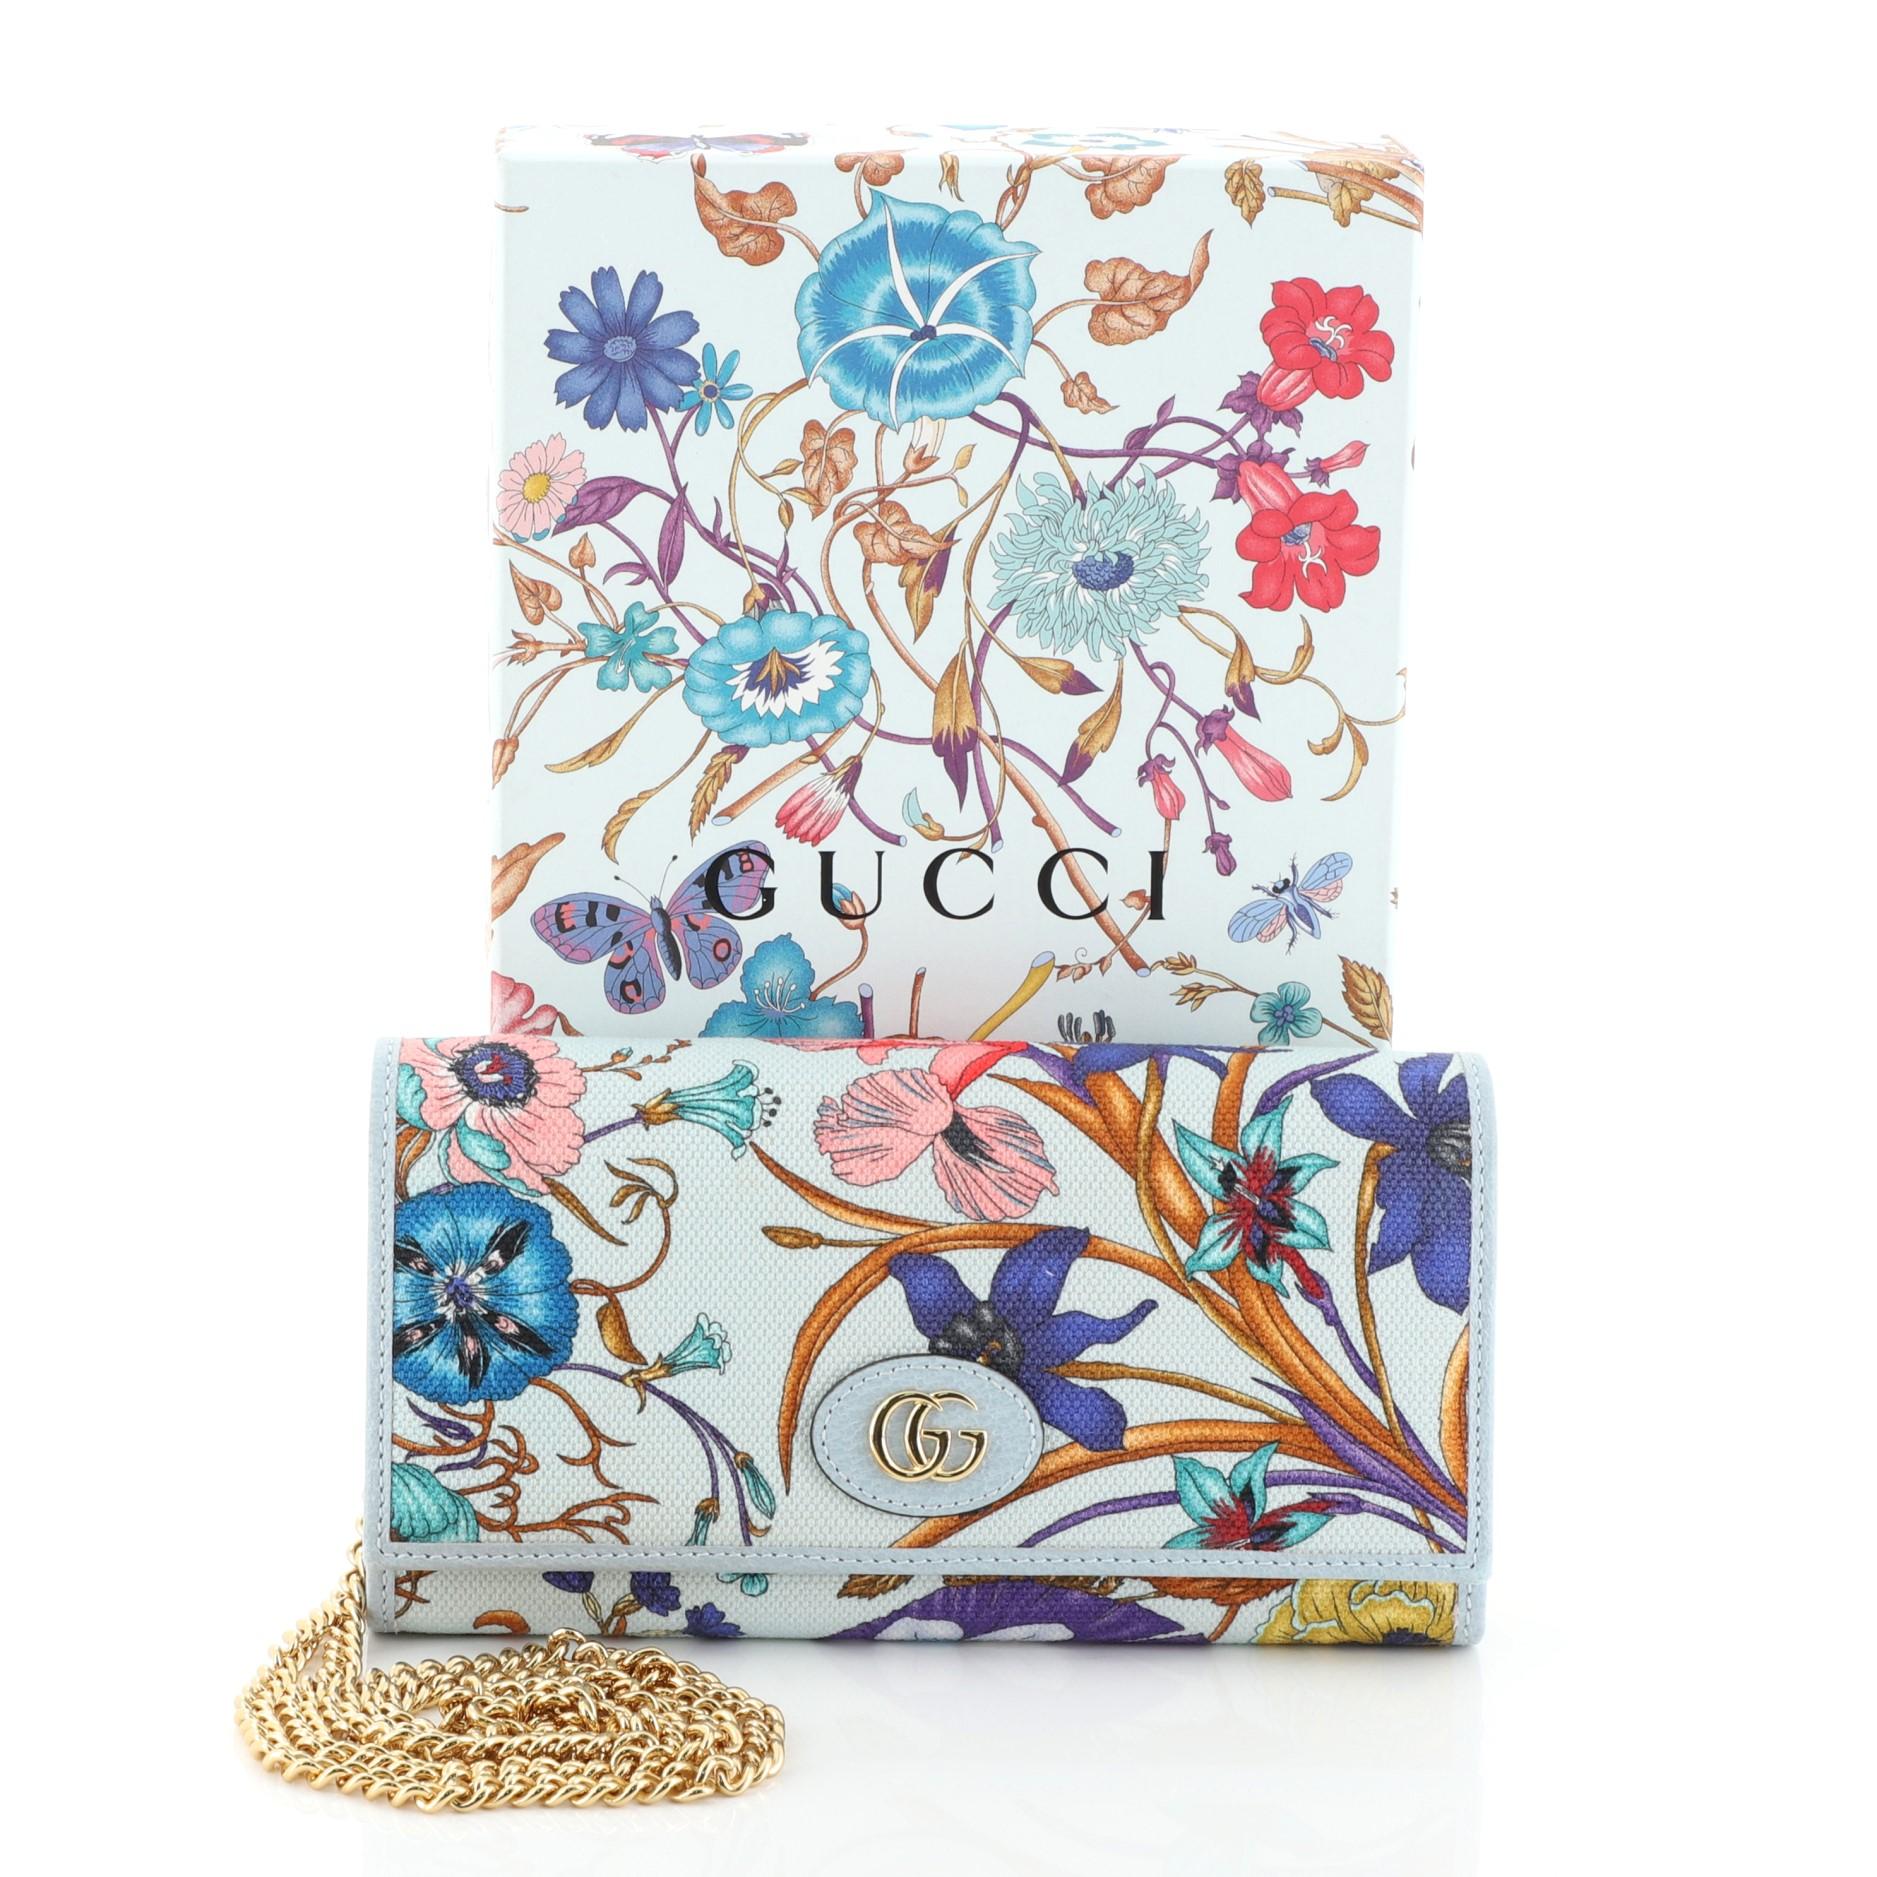 This Gucci Wallet on Chain Flora Canvas, crafted in blue printed canvas, features chain-link strap, GG logo at front Floral print and gold-tone hardware. It opens to a blue leather and fabric interior with multiple card slots and zip pocket.